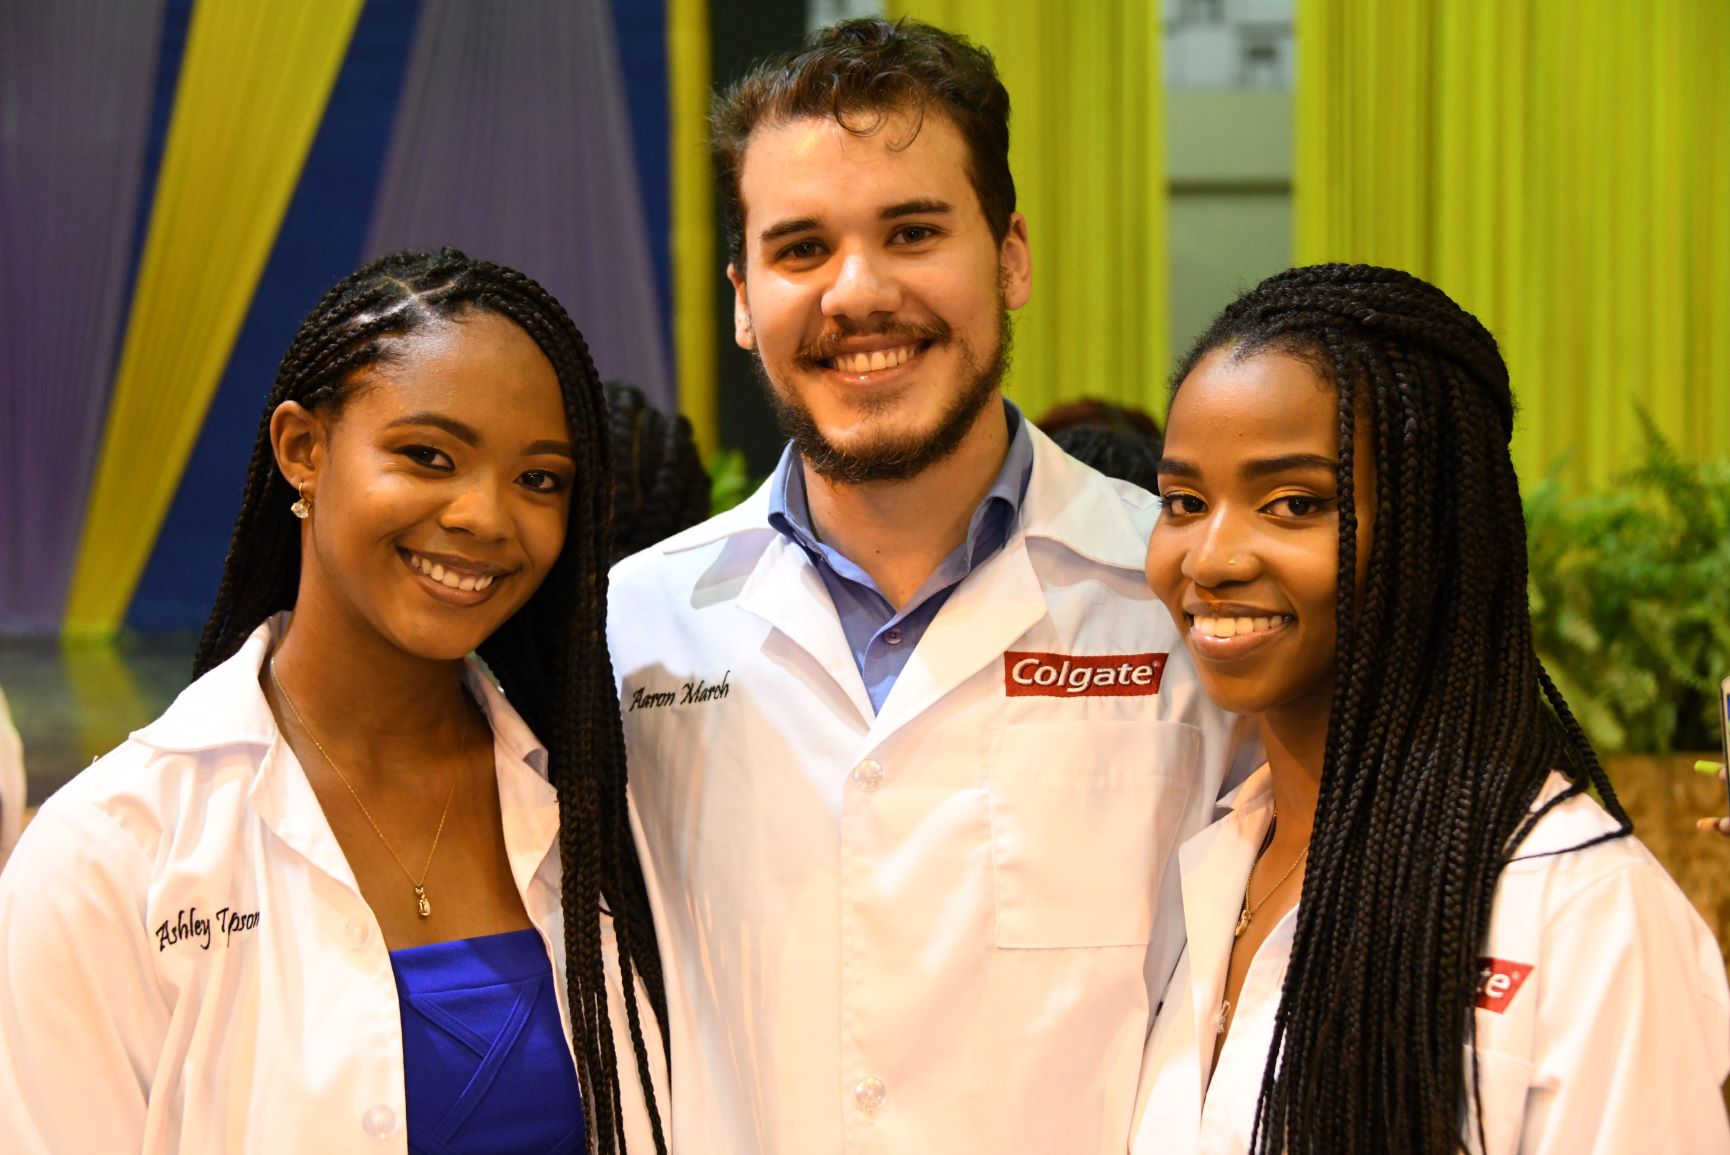 Annual White Coat Ceremony Marks Dental Students Progress to Clinical Training Years 